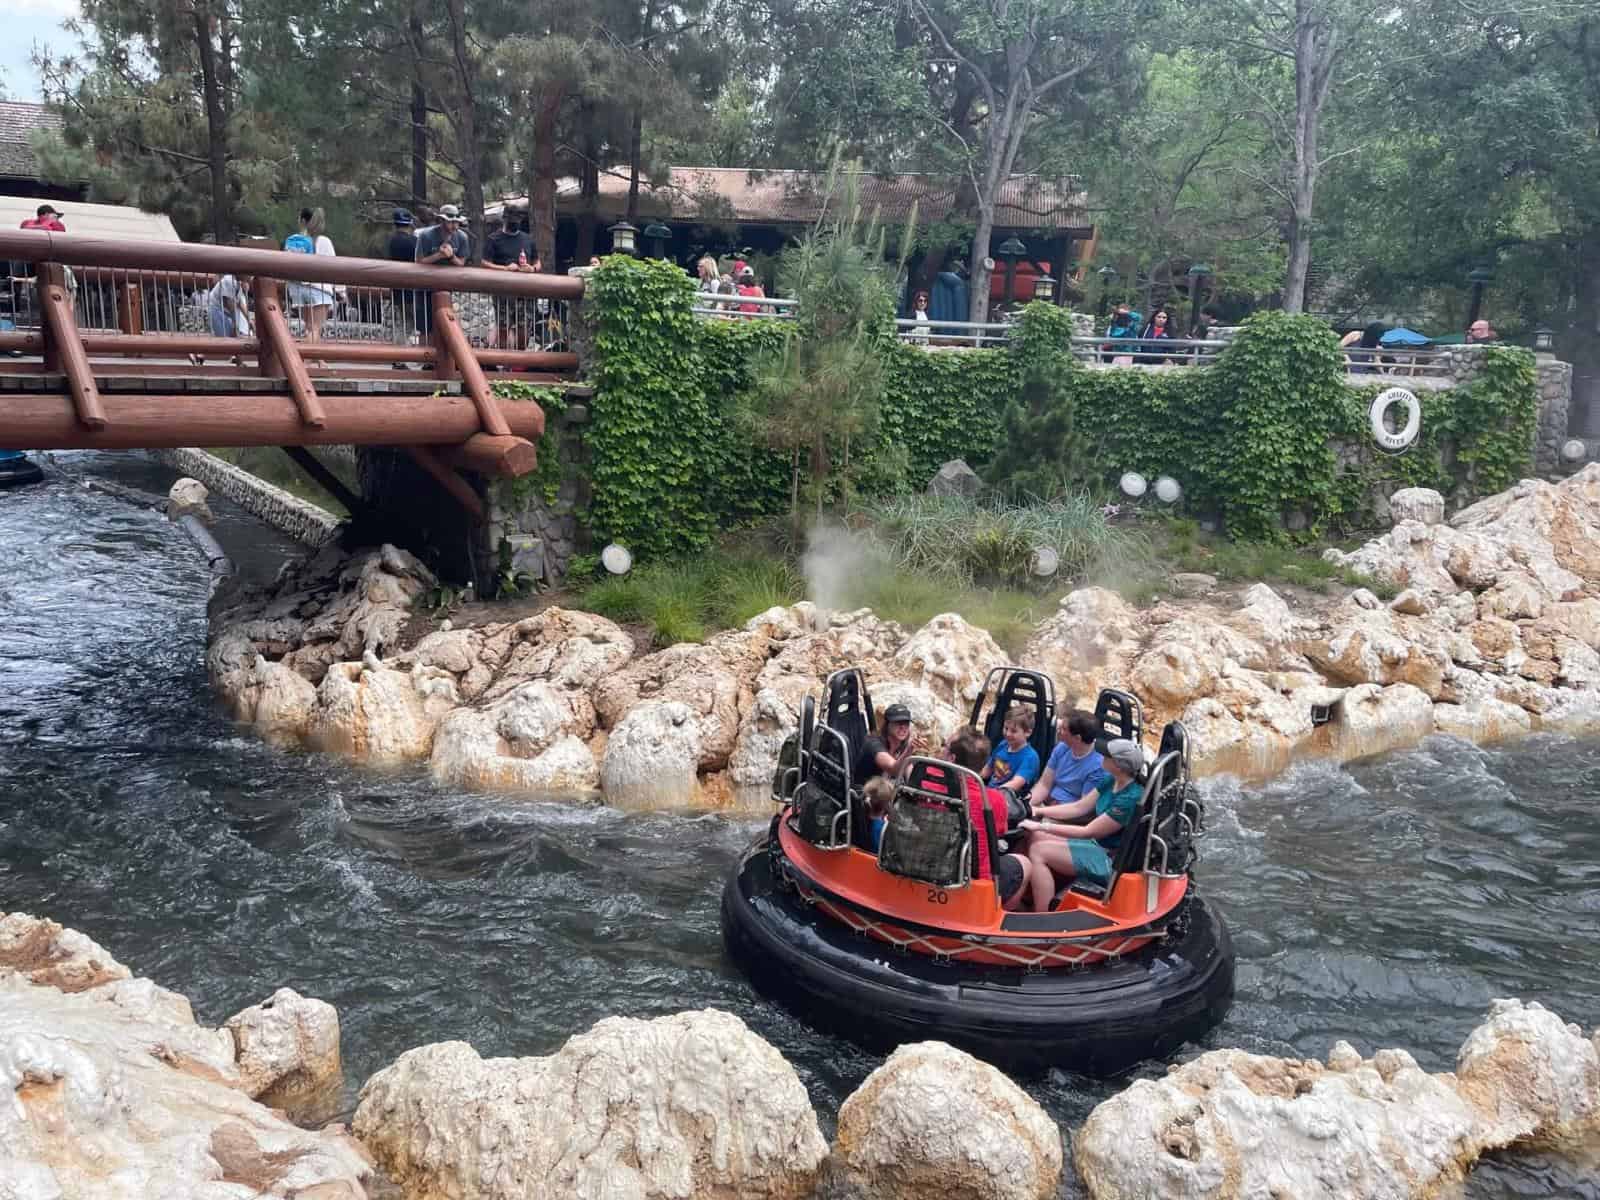 Best Rides at California Adventure on a rainy day - grizzly gulch